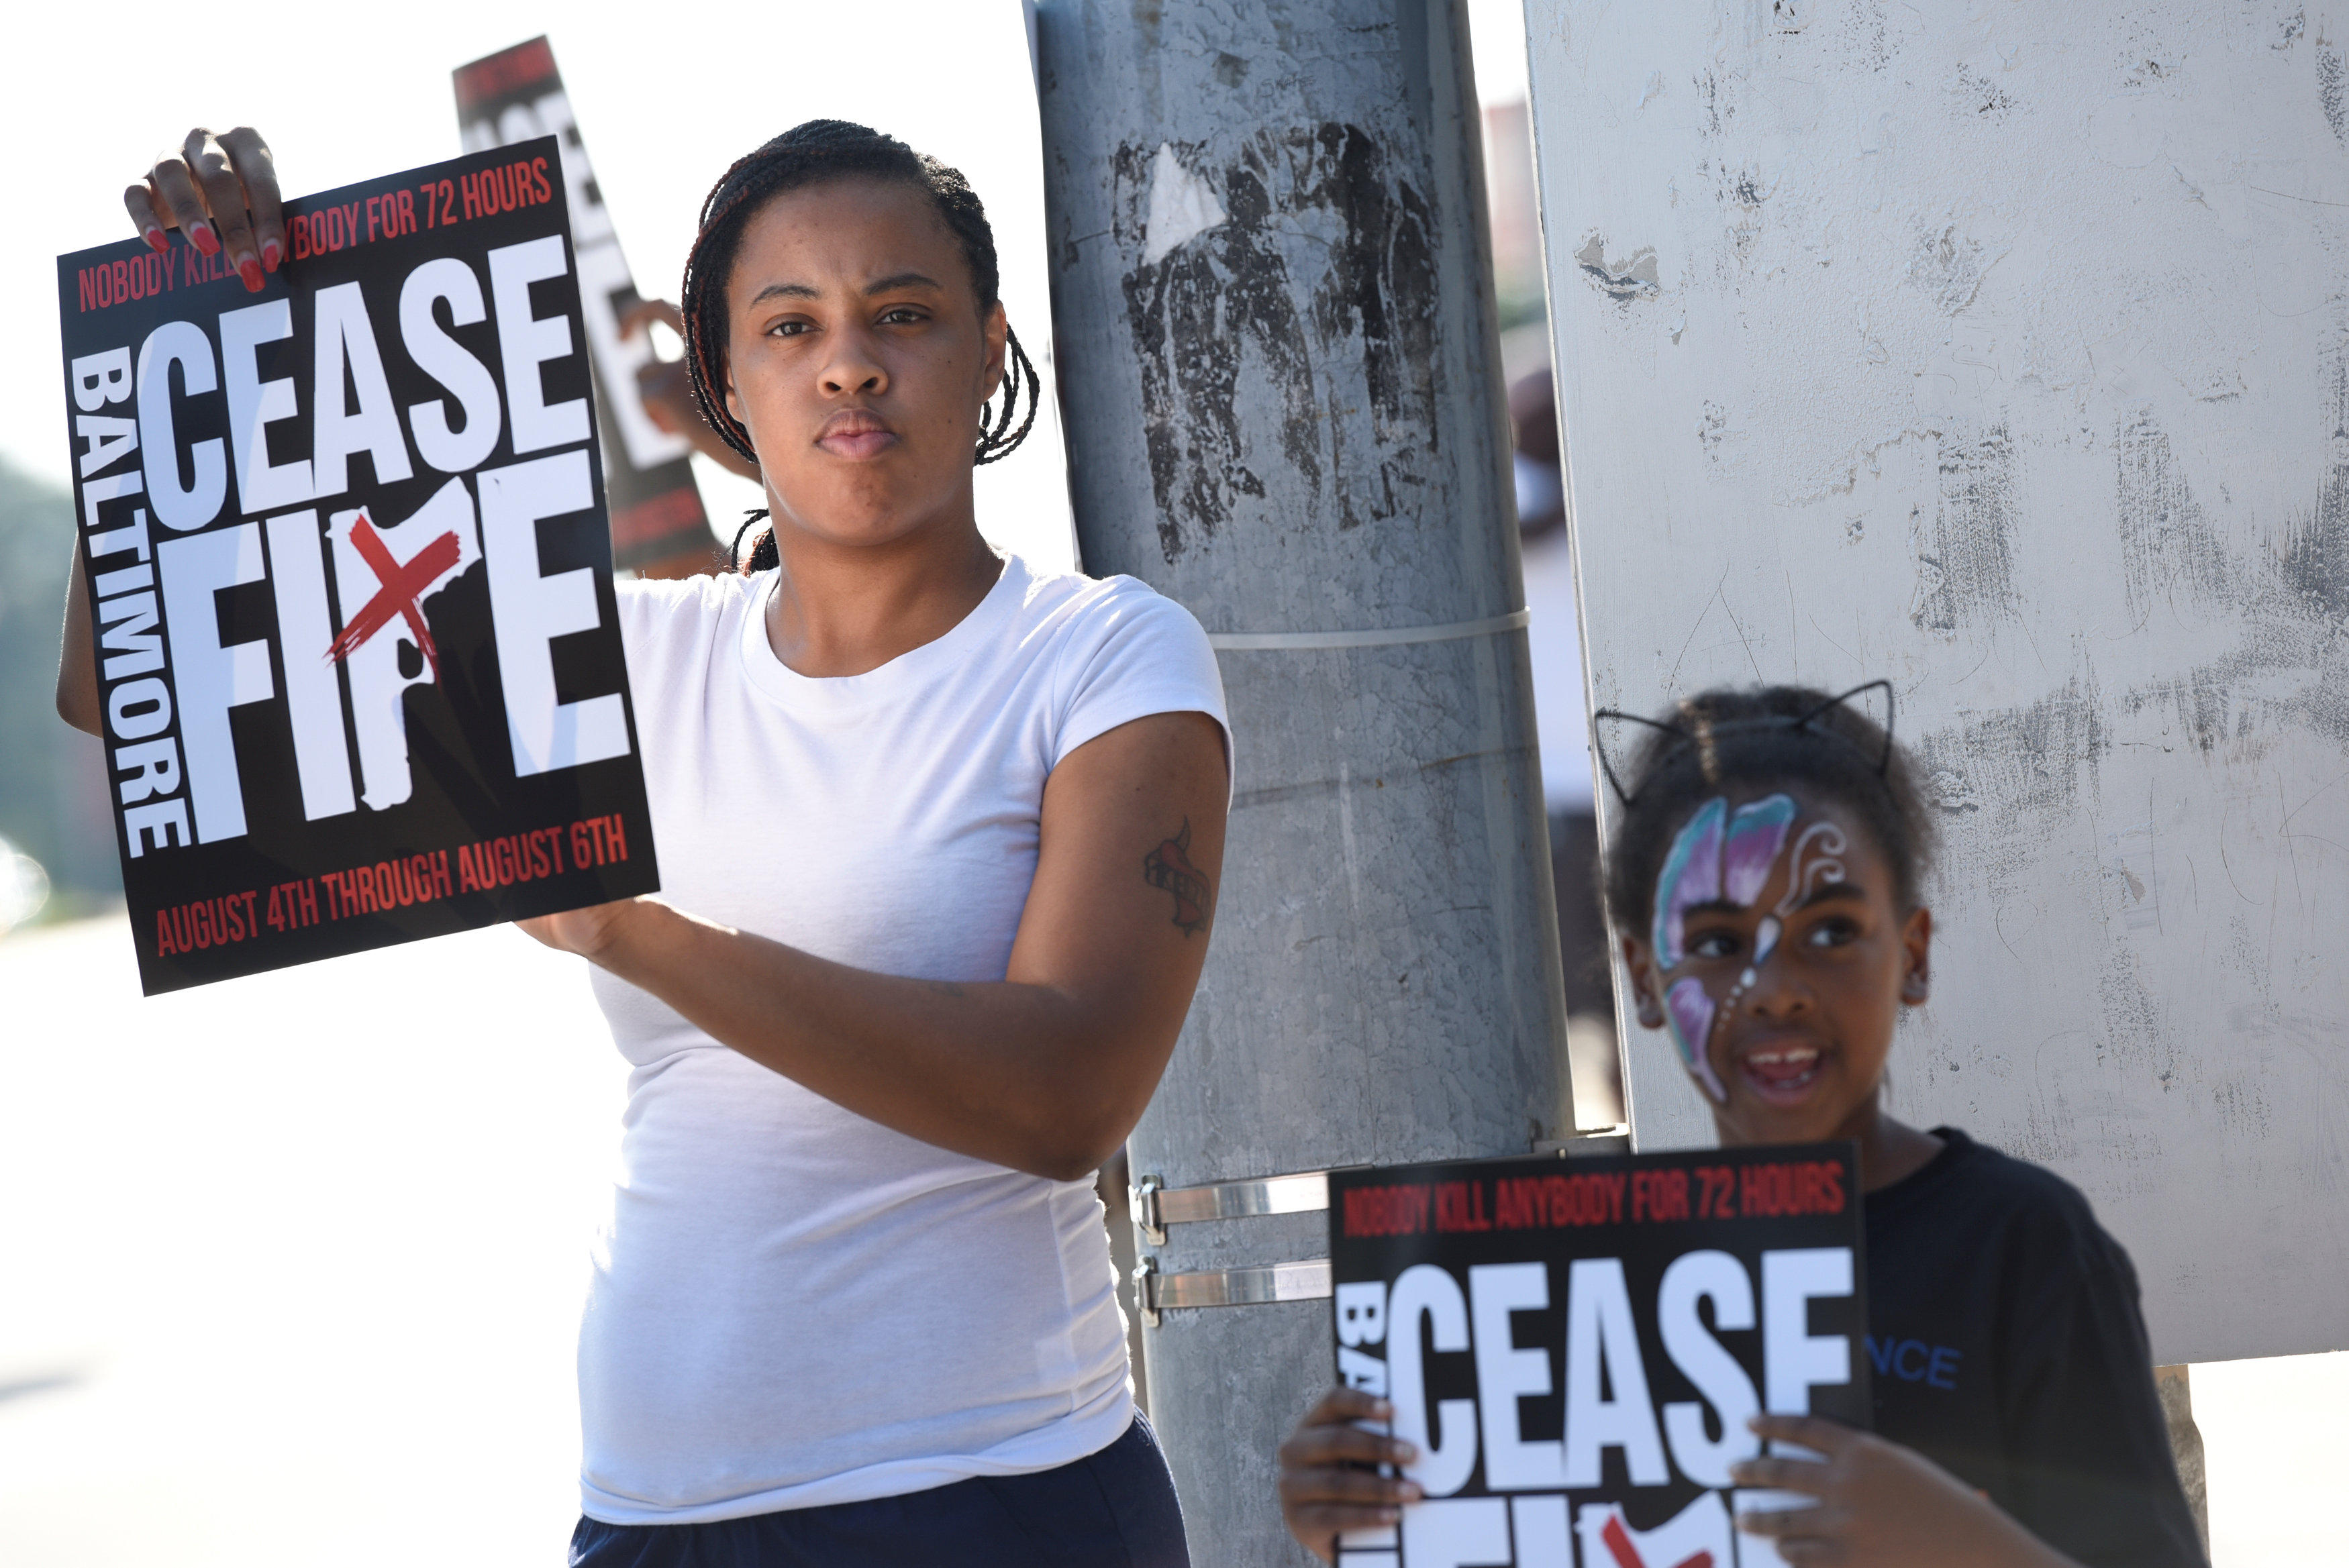 Baltimore residents plea for 3day ceasefire from violence CBS News